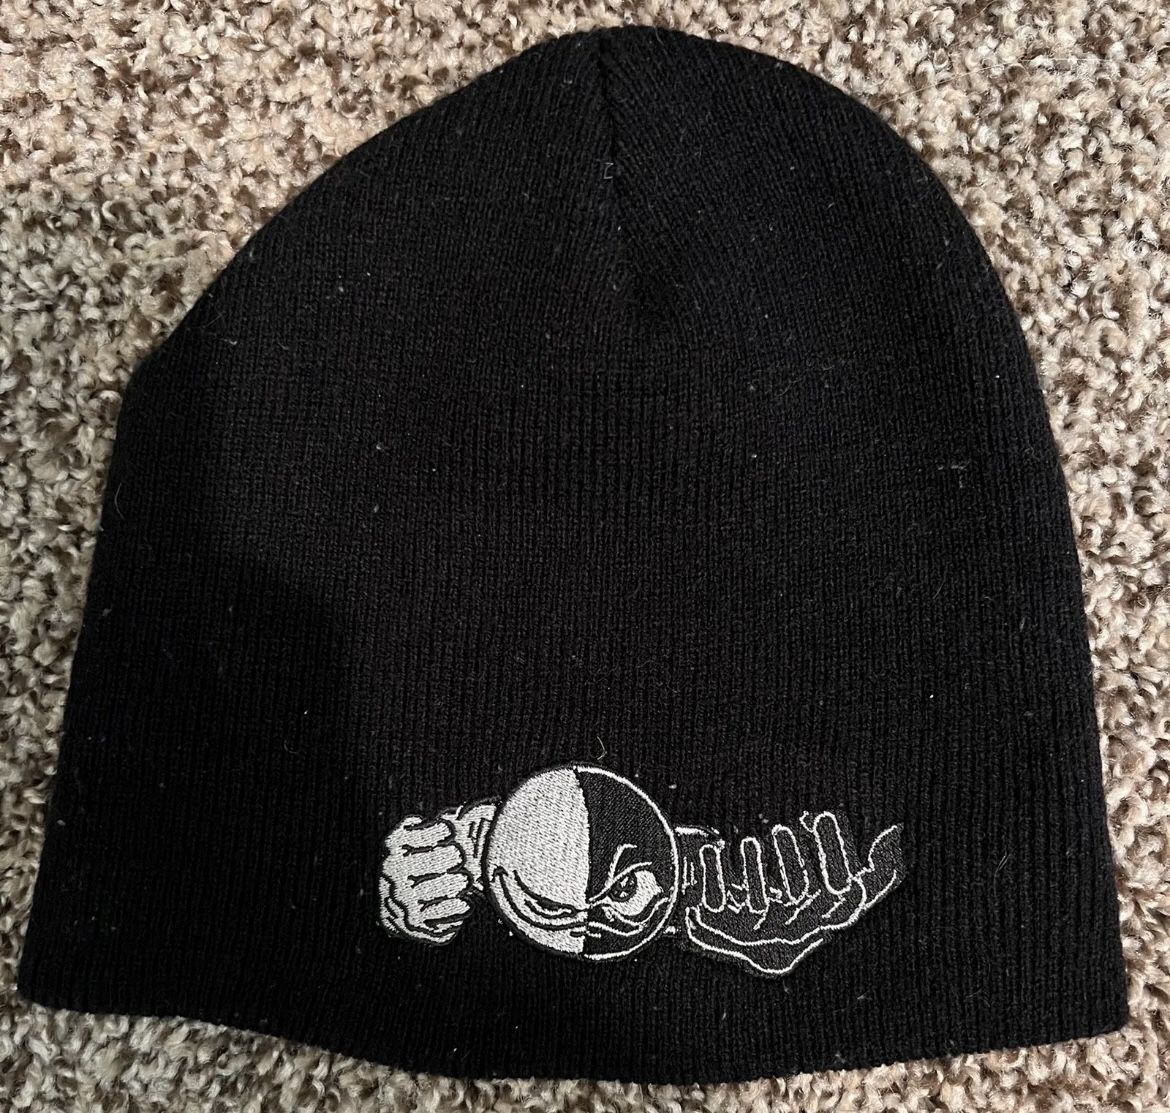 The Bouncing Souls Band Punk Rock Vintage Beanie Rare HTF Hat Small ...